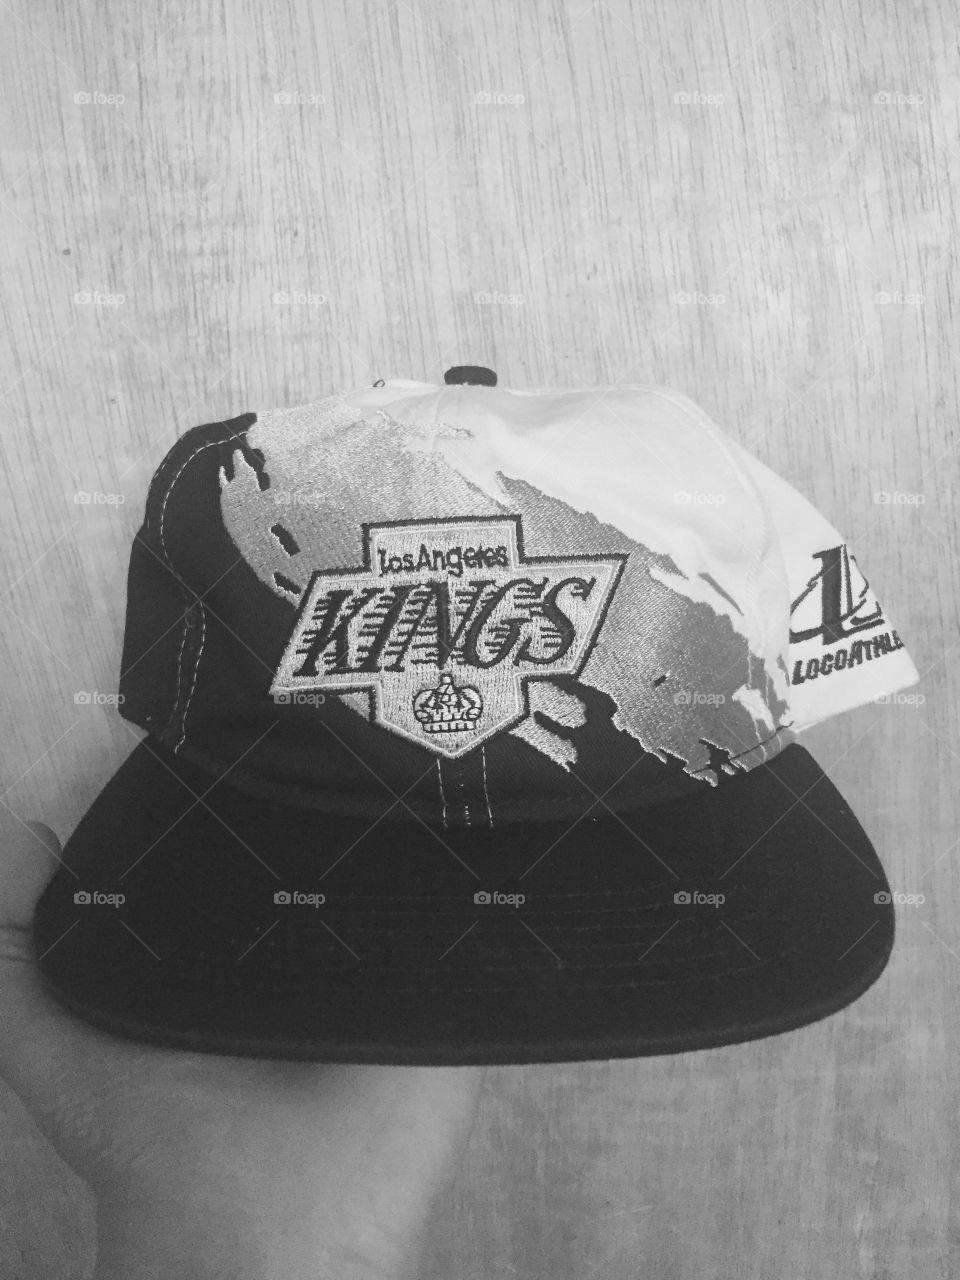 Los angeles Kings splash designed collectors cap. Inspired by the los angeles kings hokey team! Snapback hat made by LogoAthletics company.